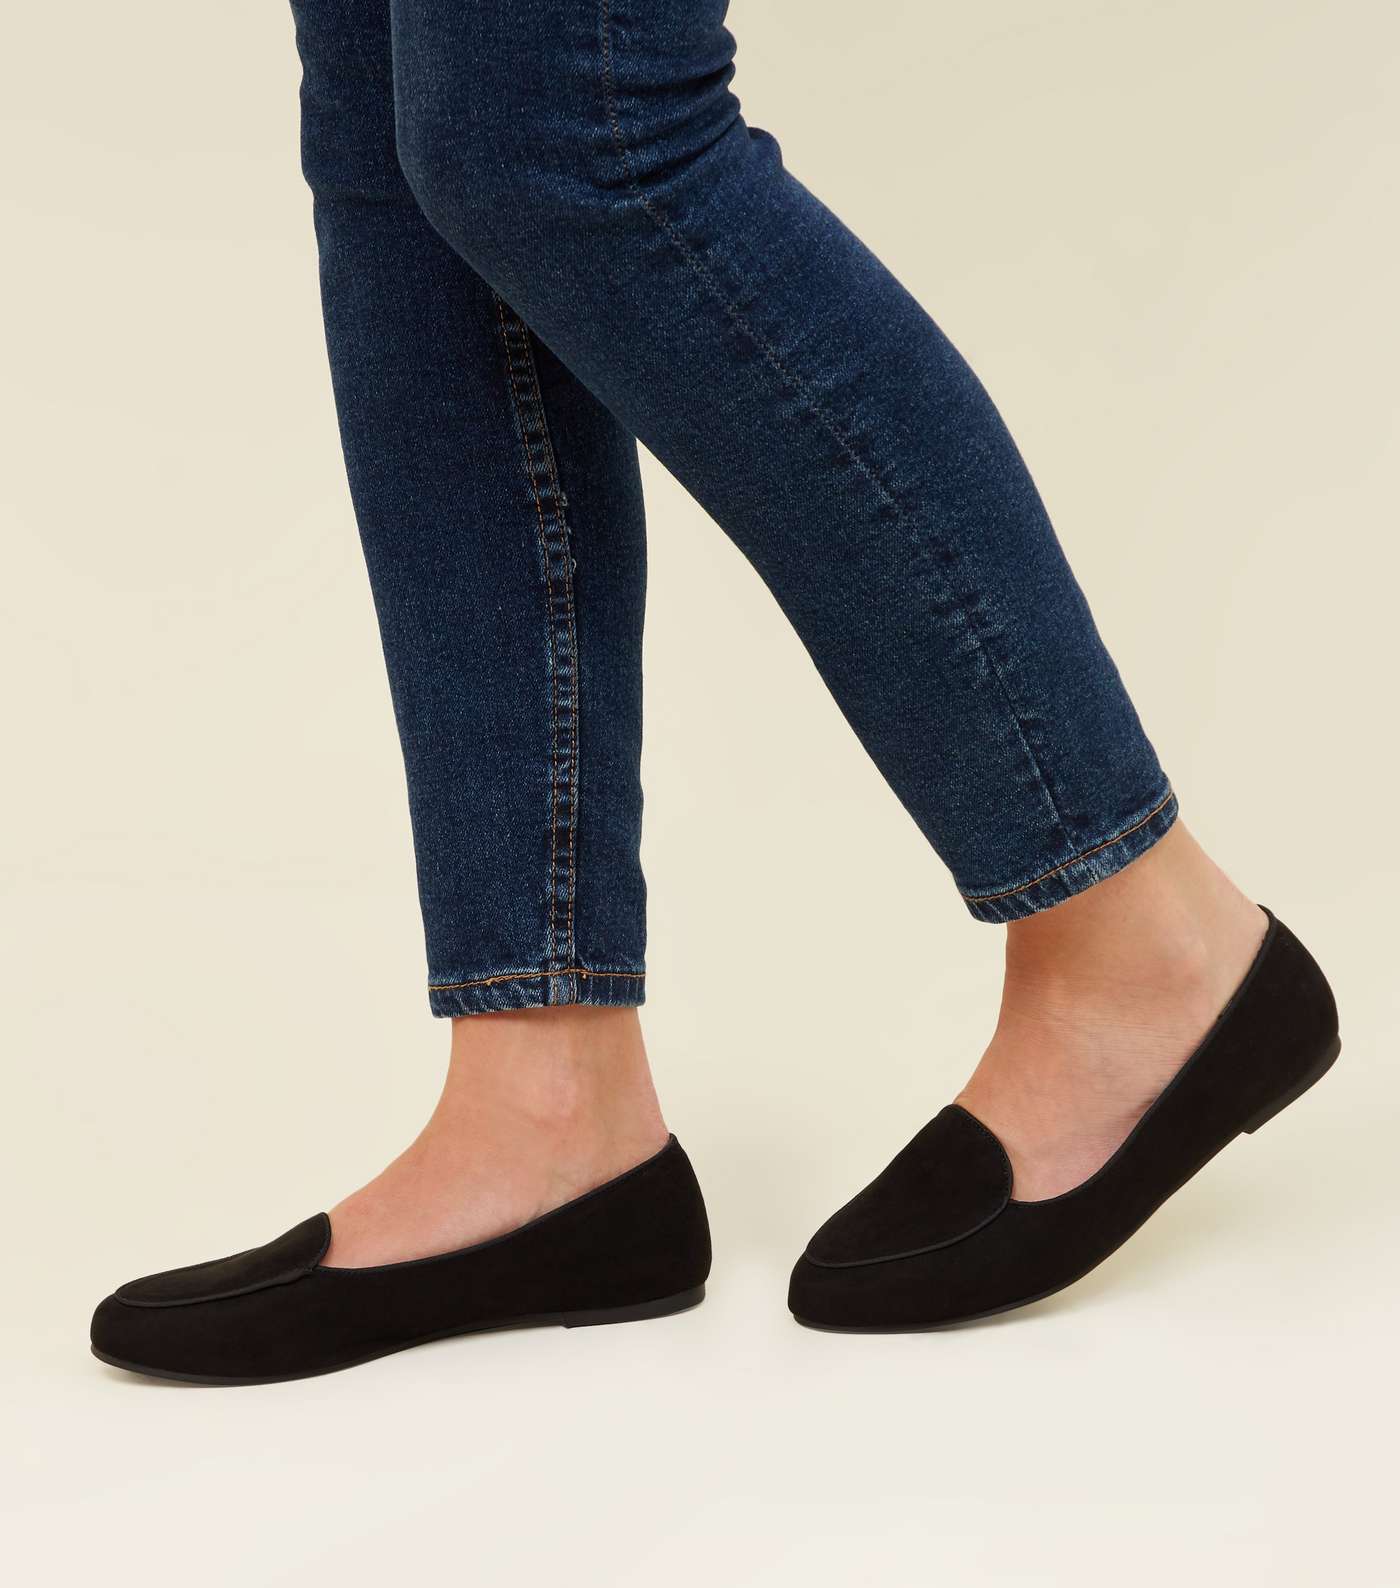 Wide Fit Black Suedette Square Toe Loafers Image 2